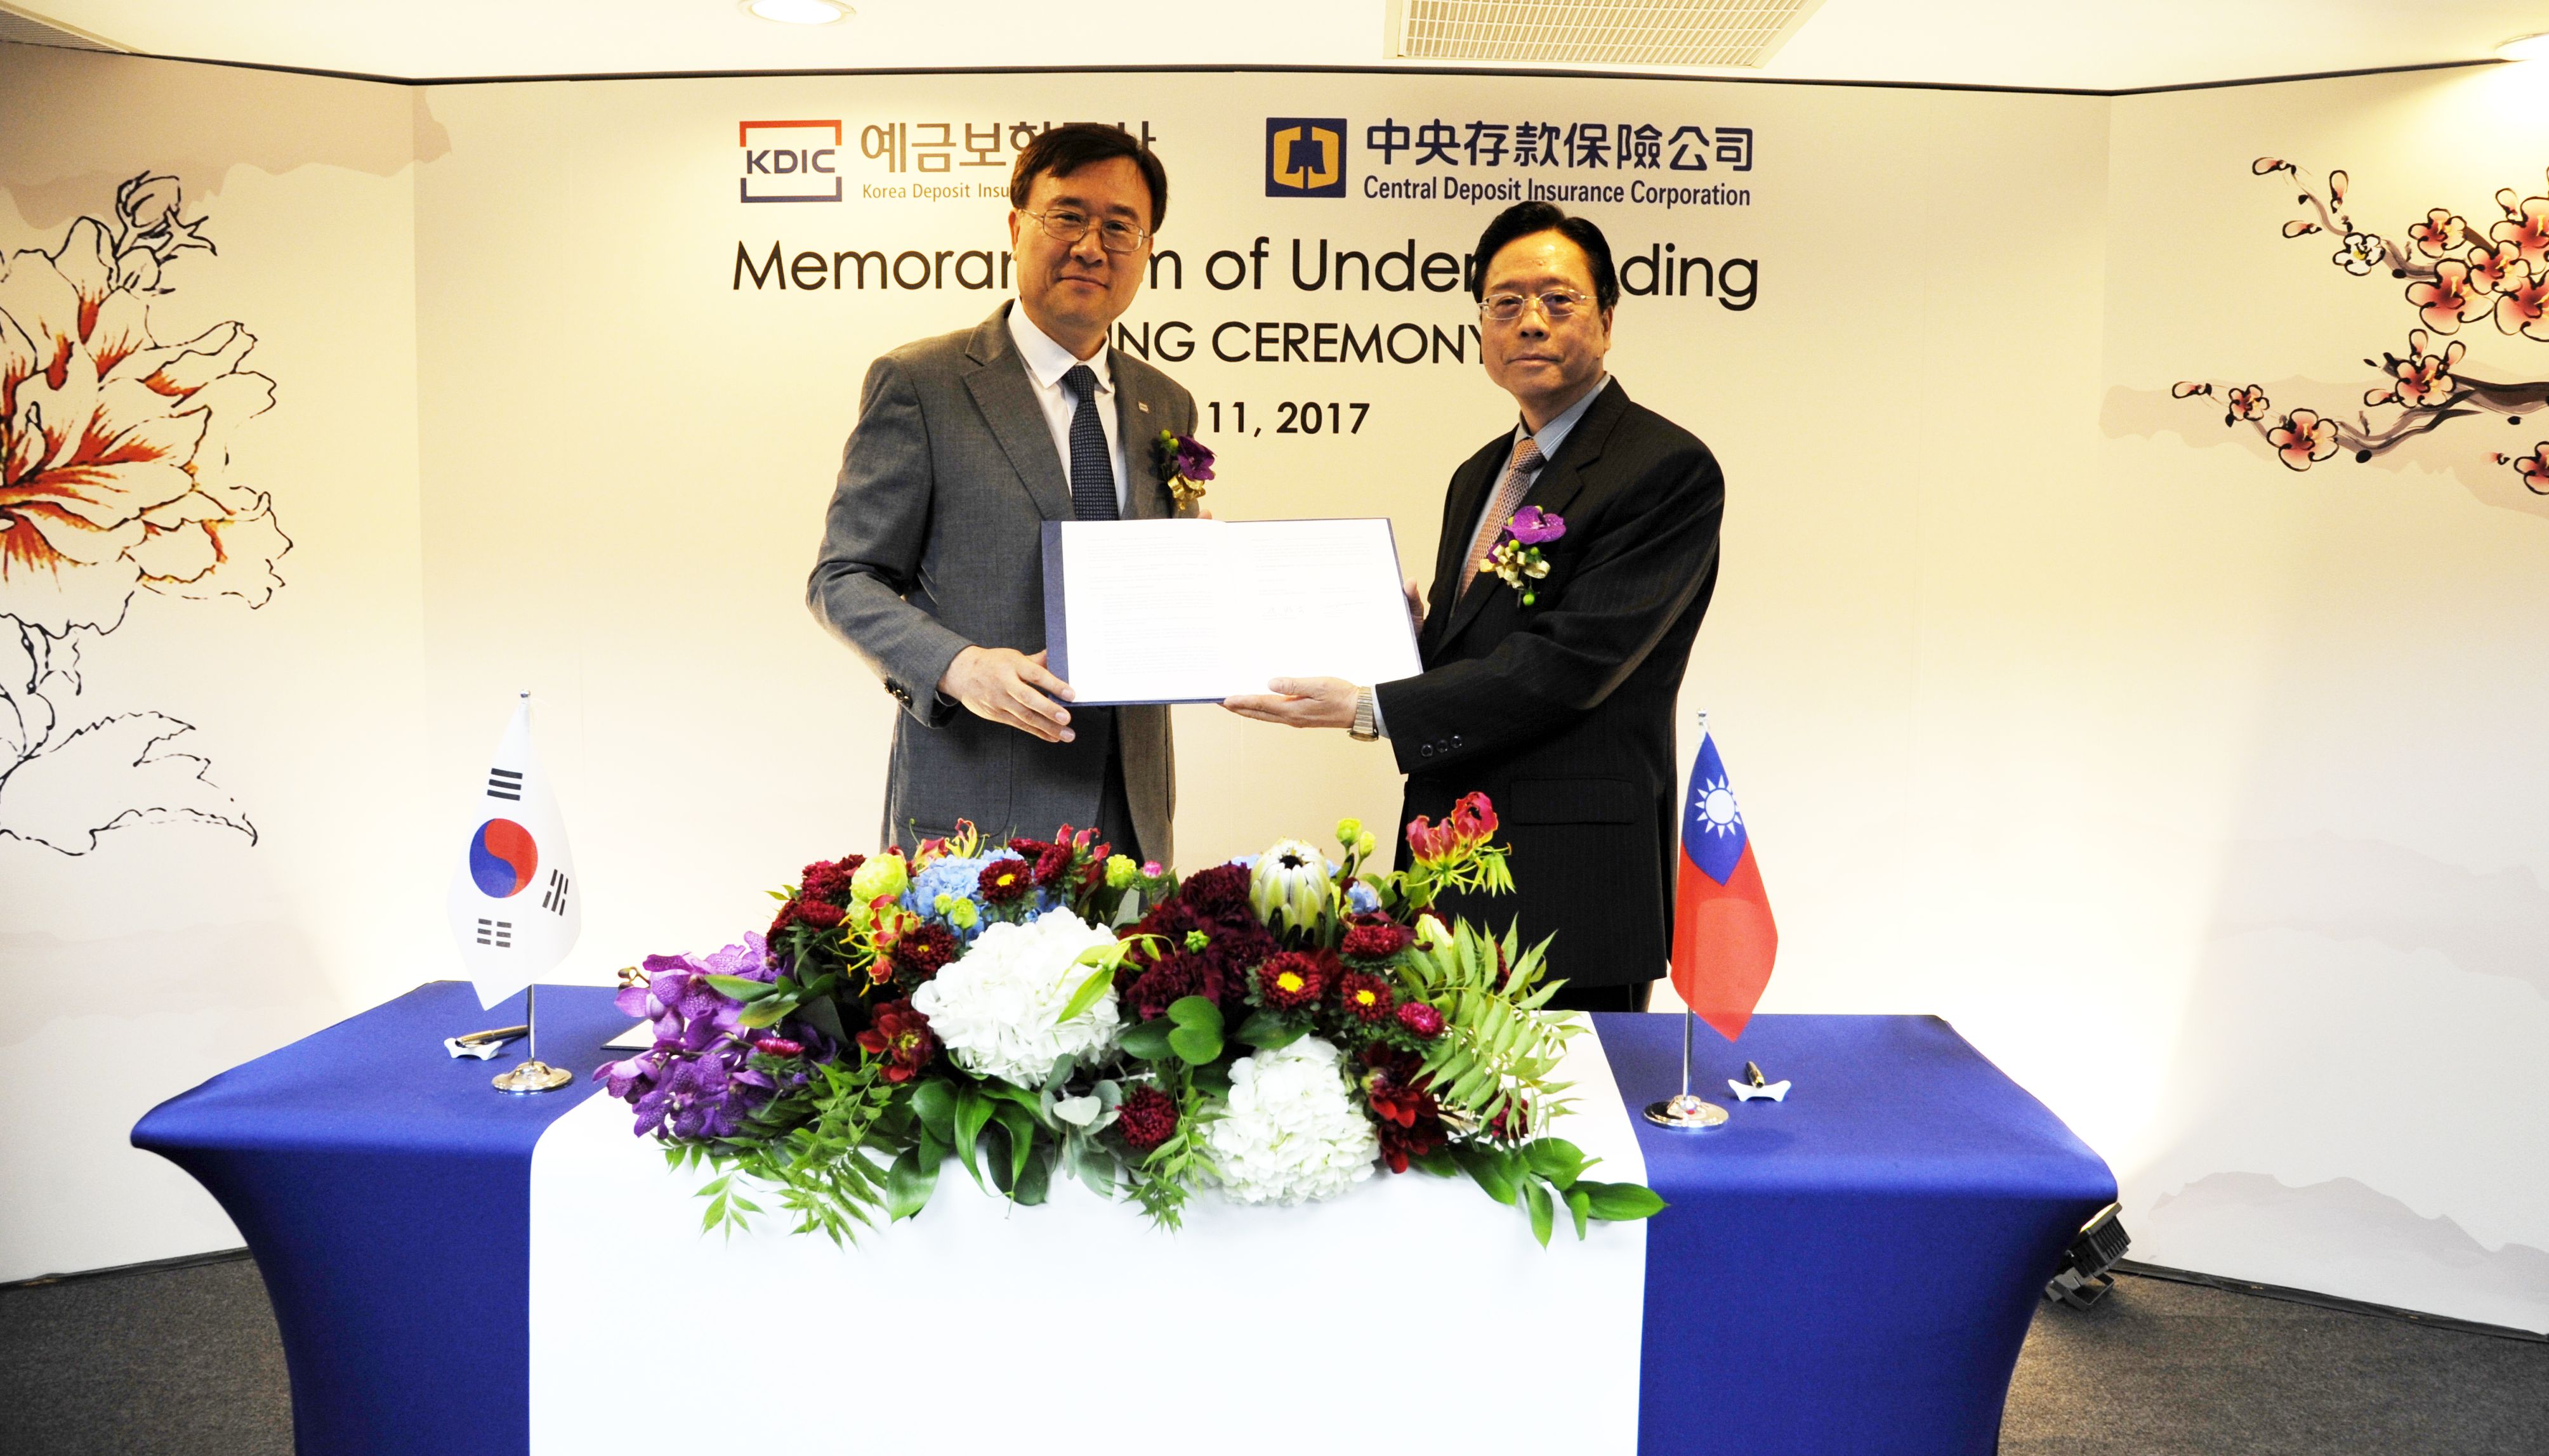 Photo of CDIC Chairman Dr. Paul C.D. Lei (right) and KDIC Chairman & President Dr. Bumgook Gwak (left) in the MOU signing ceremony on April 11, 2017.